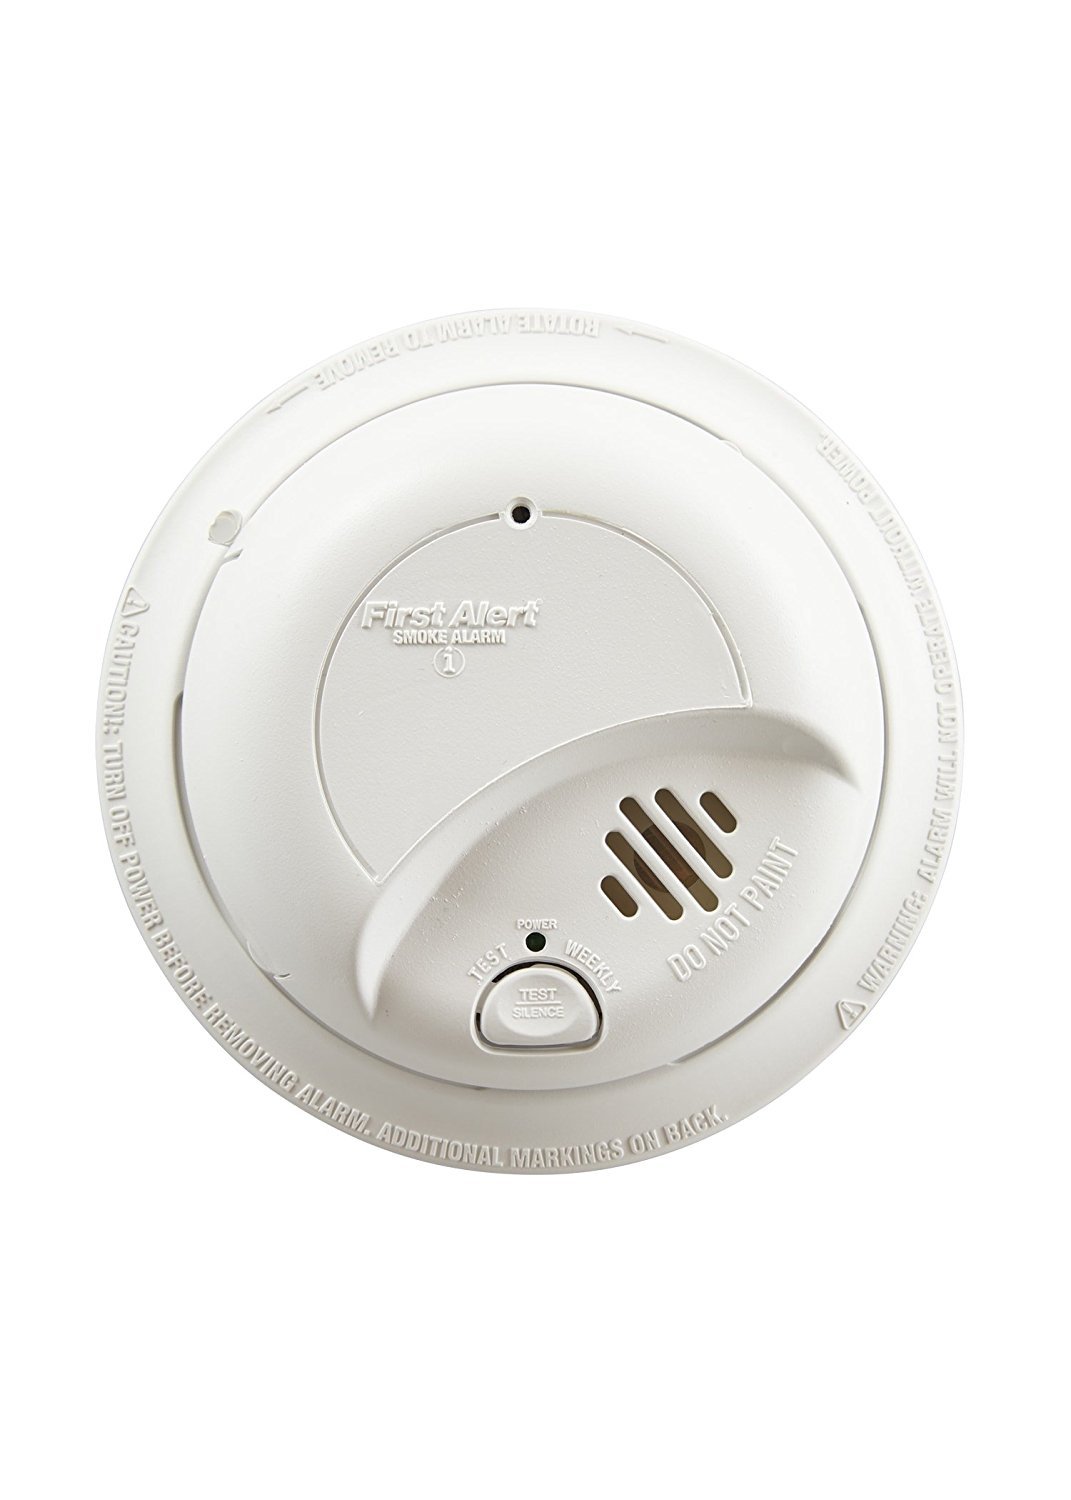 First Alert 9120B Smoke Detector, Hardwired Alarm with Battery Backup, 3-Pack